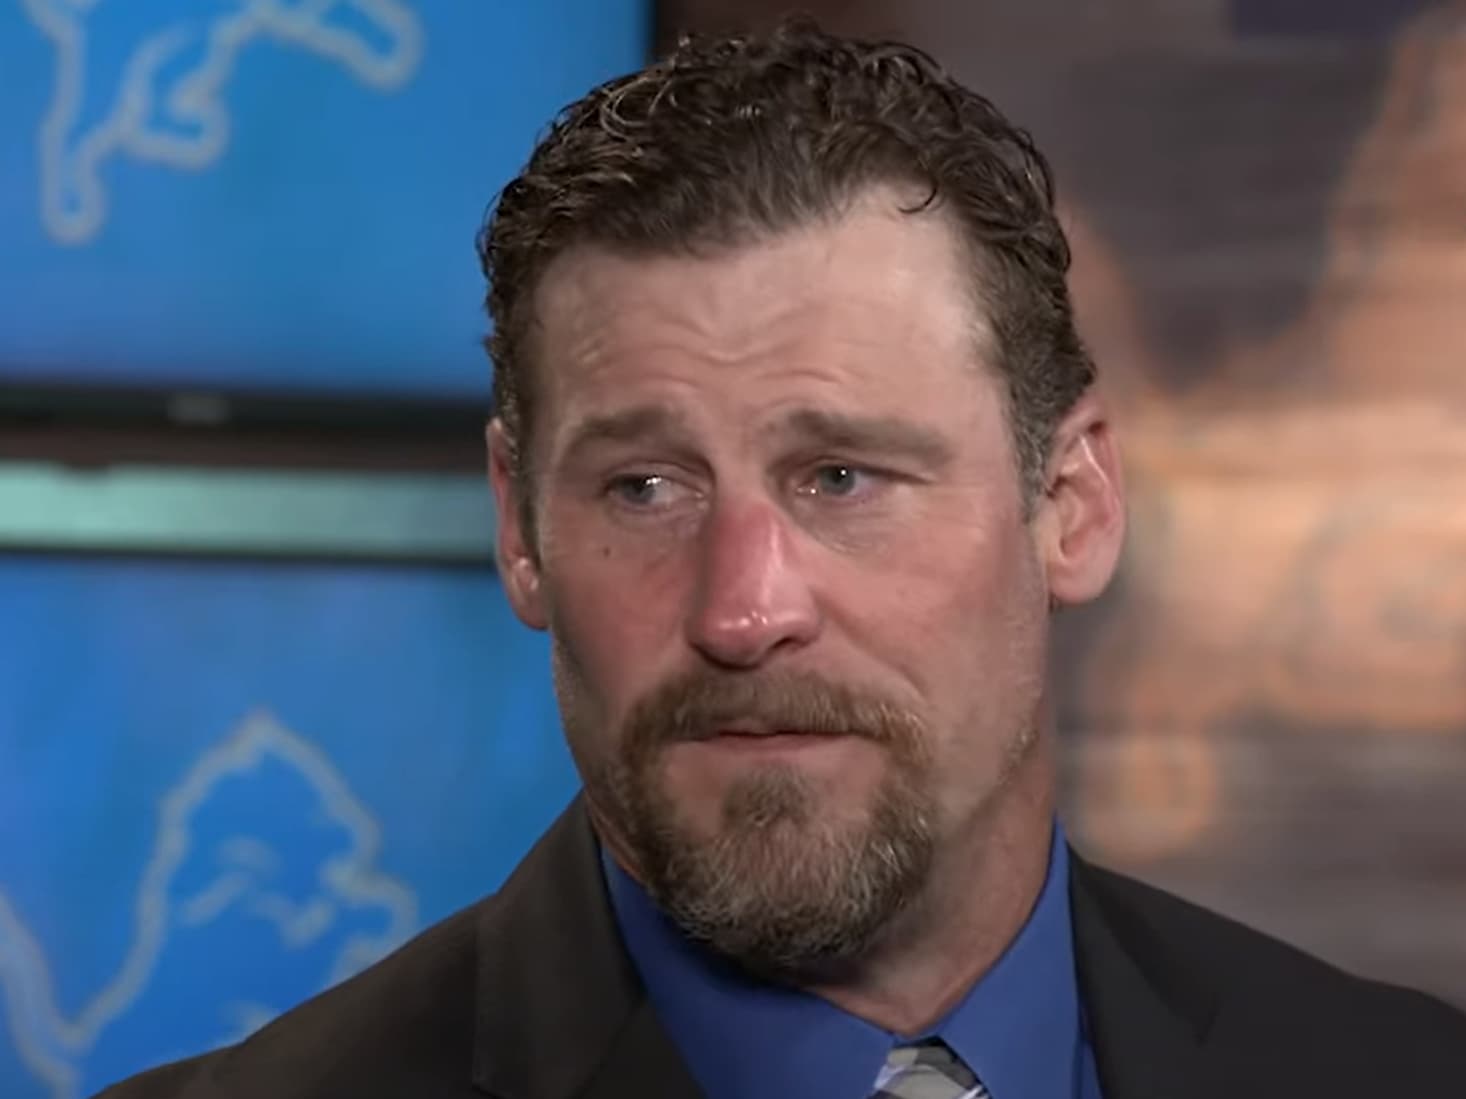 Detroit Lions coach Dan Campbell apologizes for resurfaced anti-gay comment  - Metro Weekly